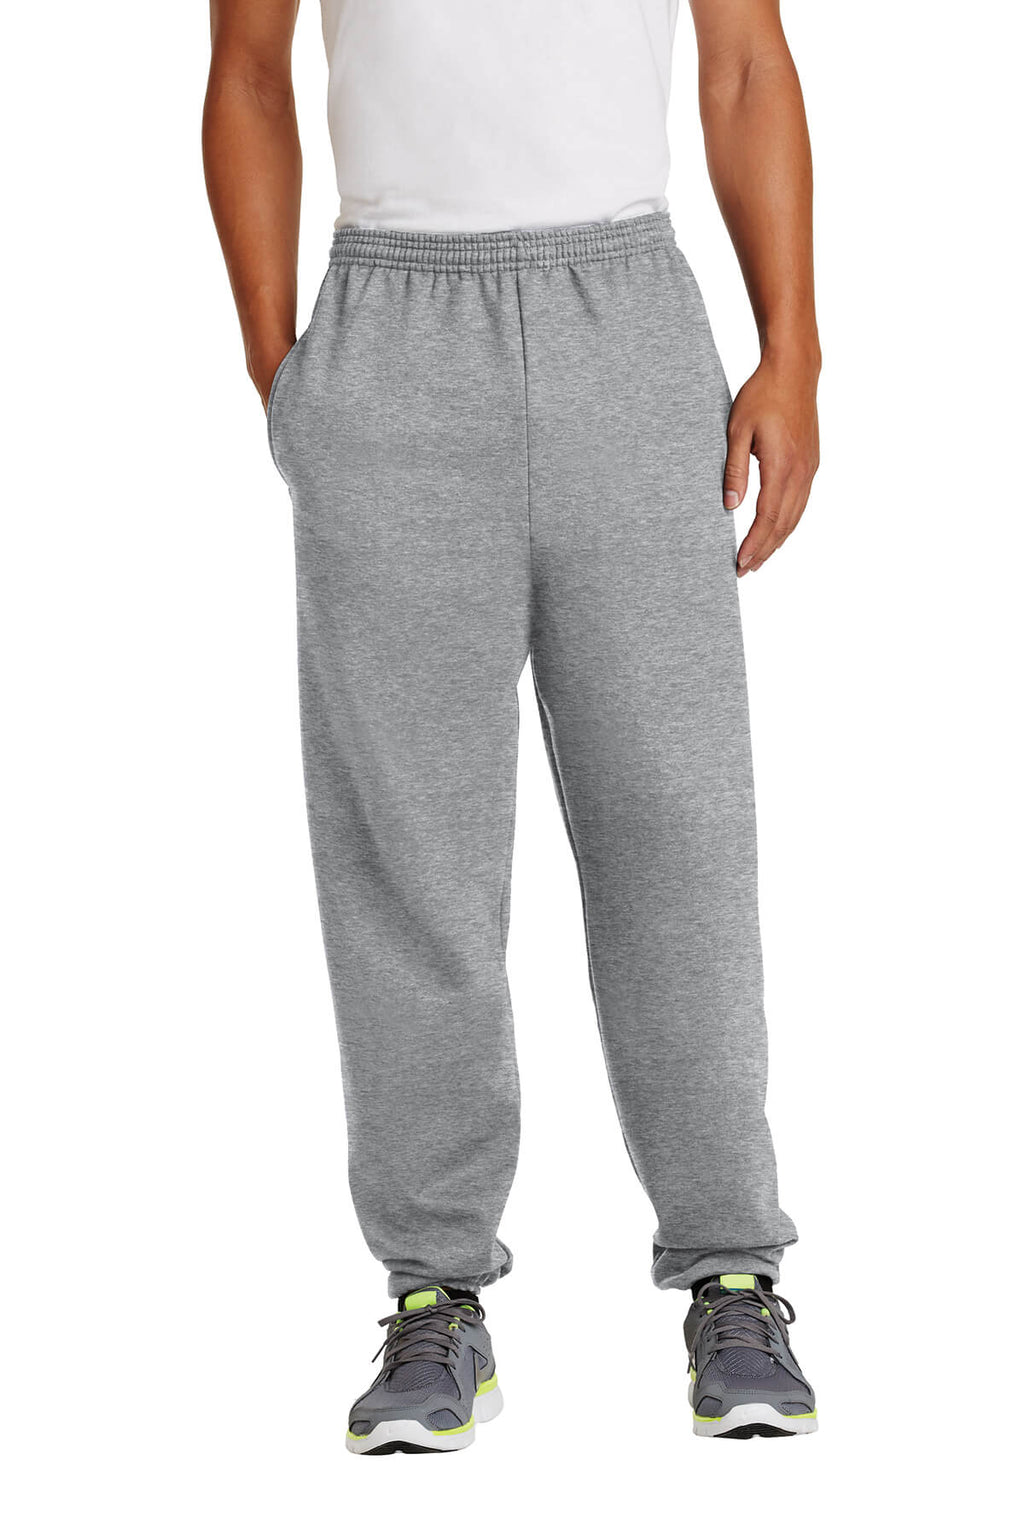 Port & Company Ultimate Sweatpant With Pockets-4